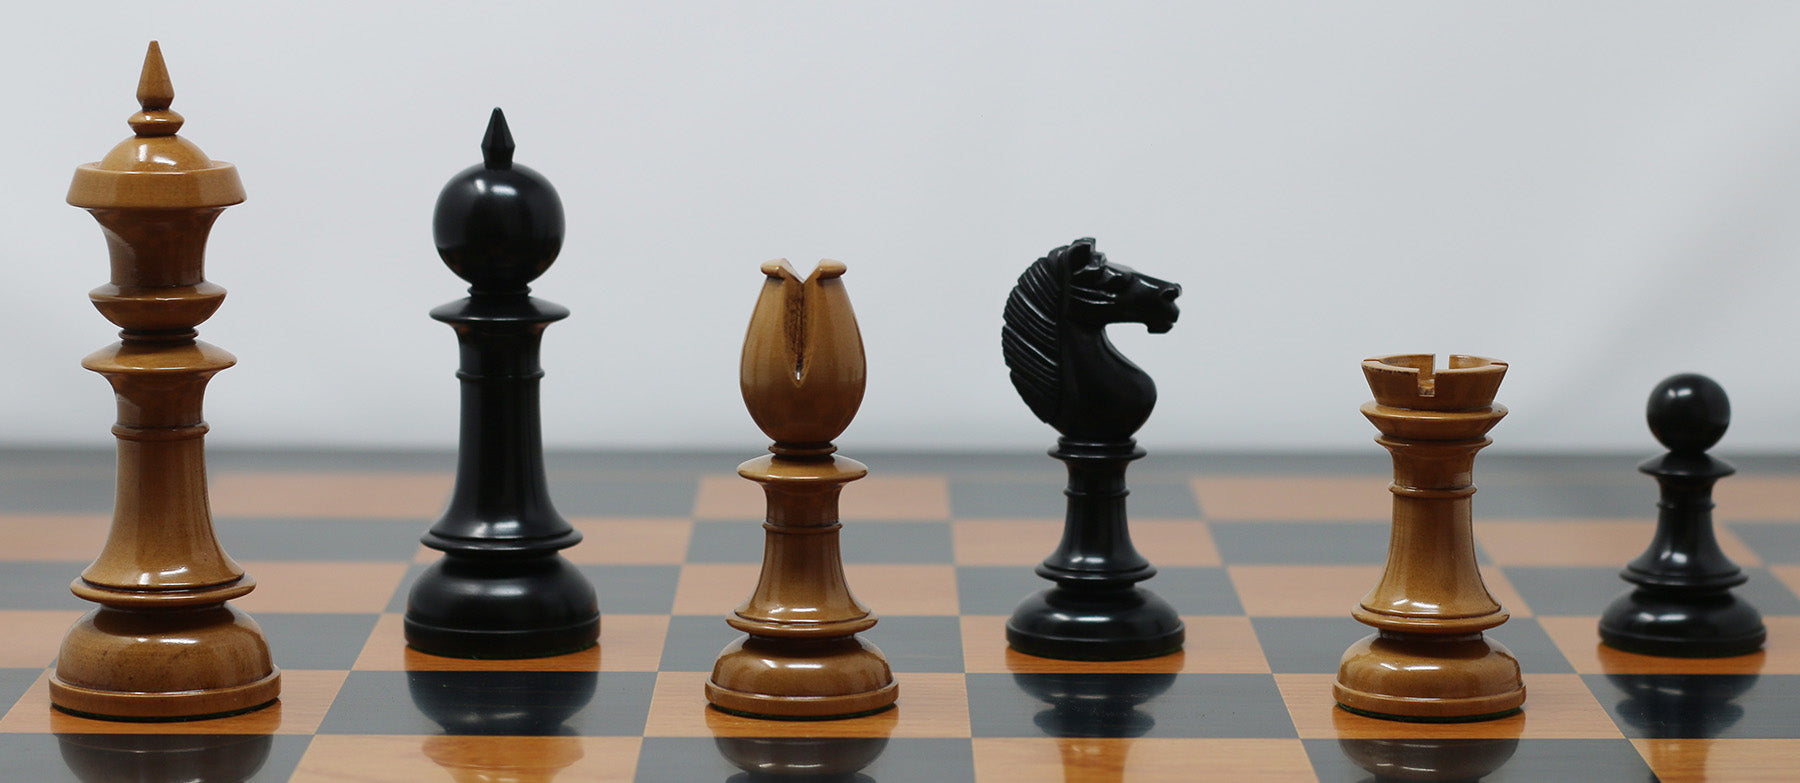 Northern Upright Vintage 5" Antiqued chess set in Distressed Boxwood & Ebony wood